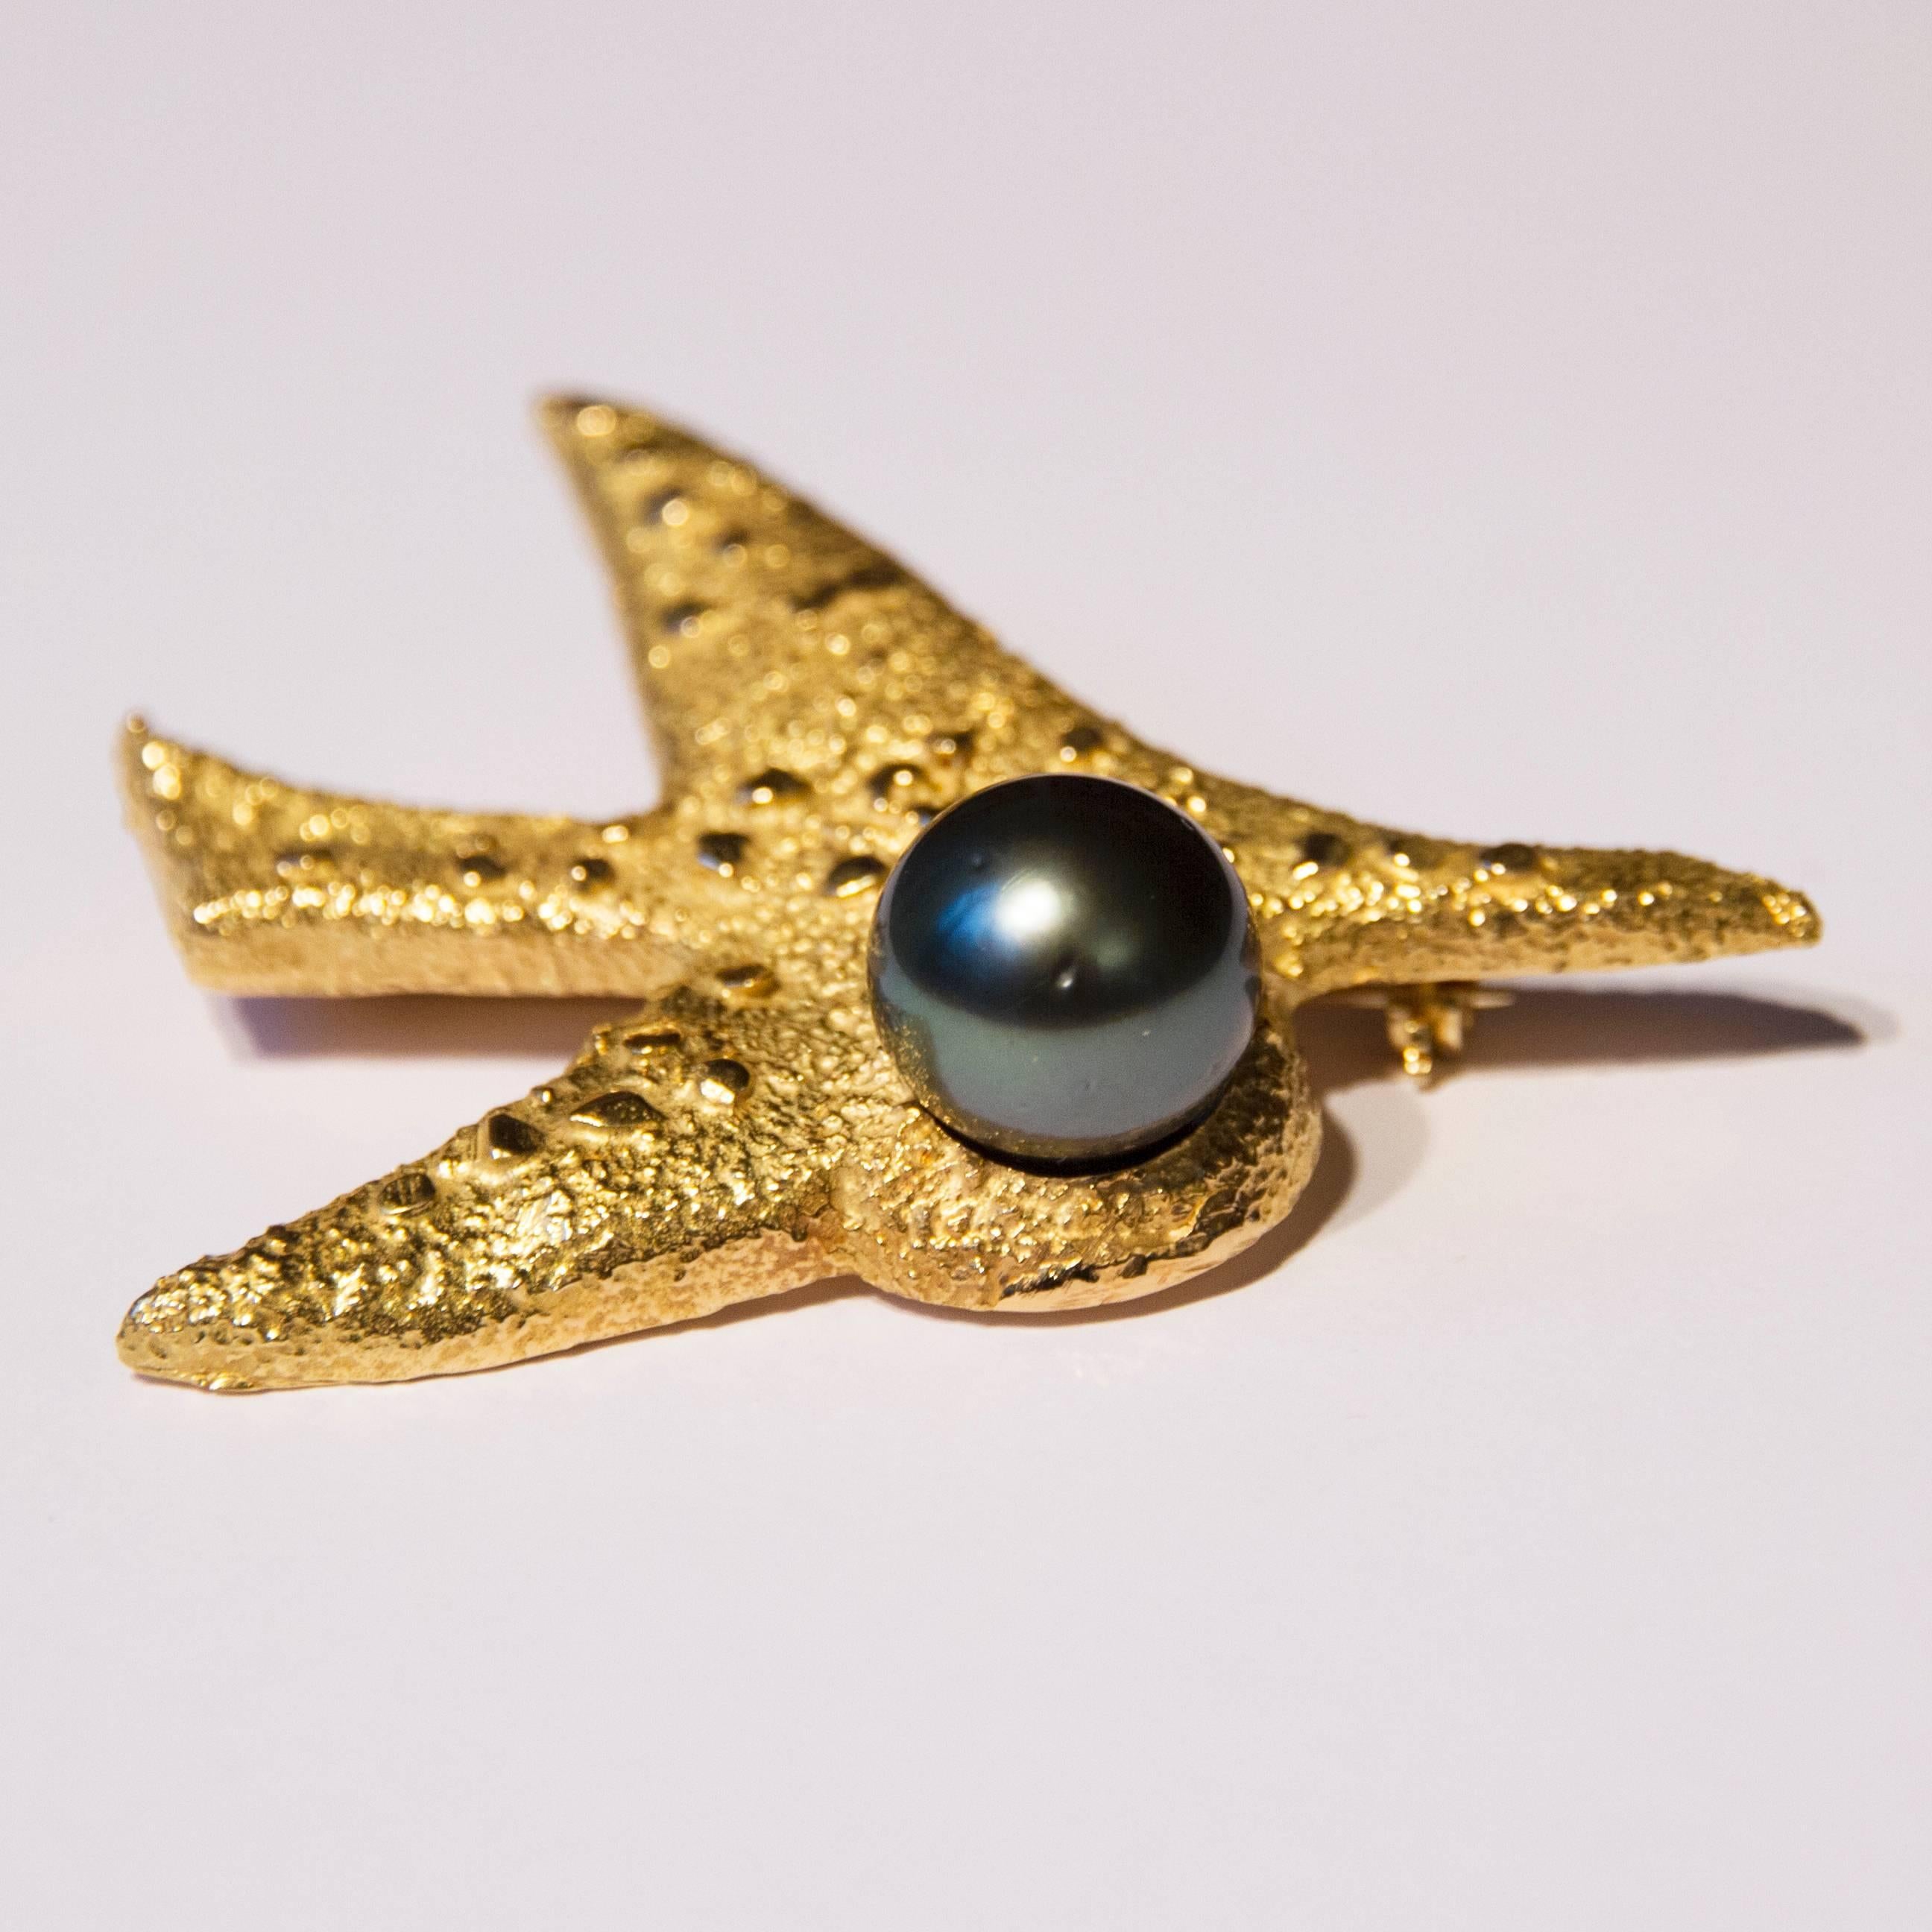 Beautiful 18K Gold Brooch with a perfect round Tahiti pearl by Georges Braque (1882-1963), inventor of cubism.
The piece is signed "Bijoux de Braque" and numbered 3/8. 
It was chosen by Georges Braque after one of his drawing called